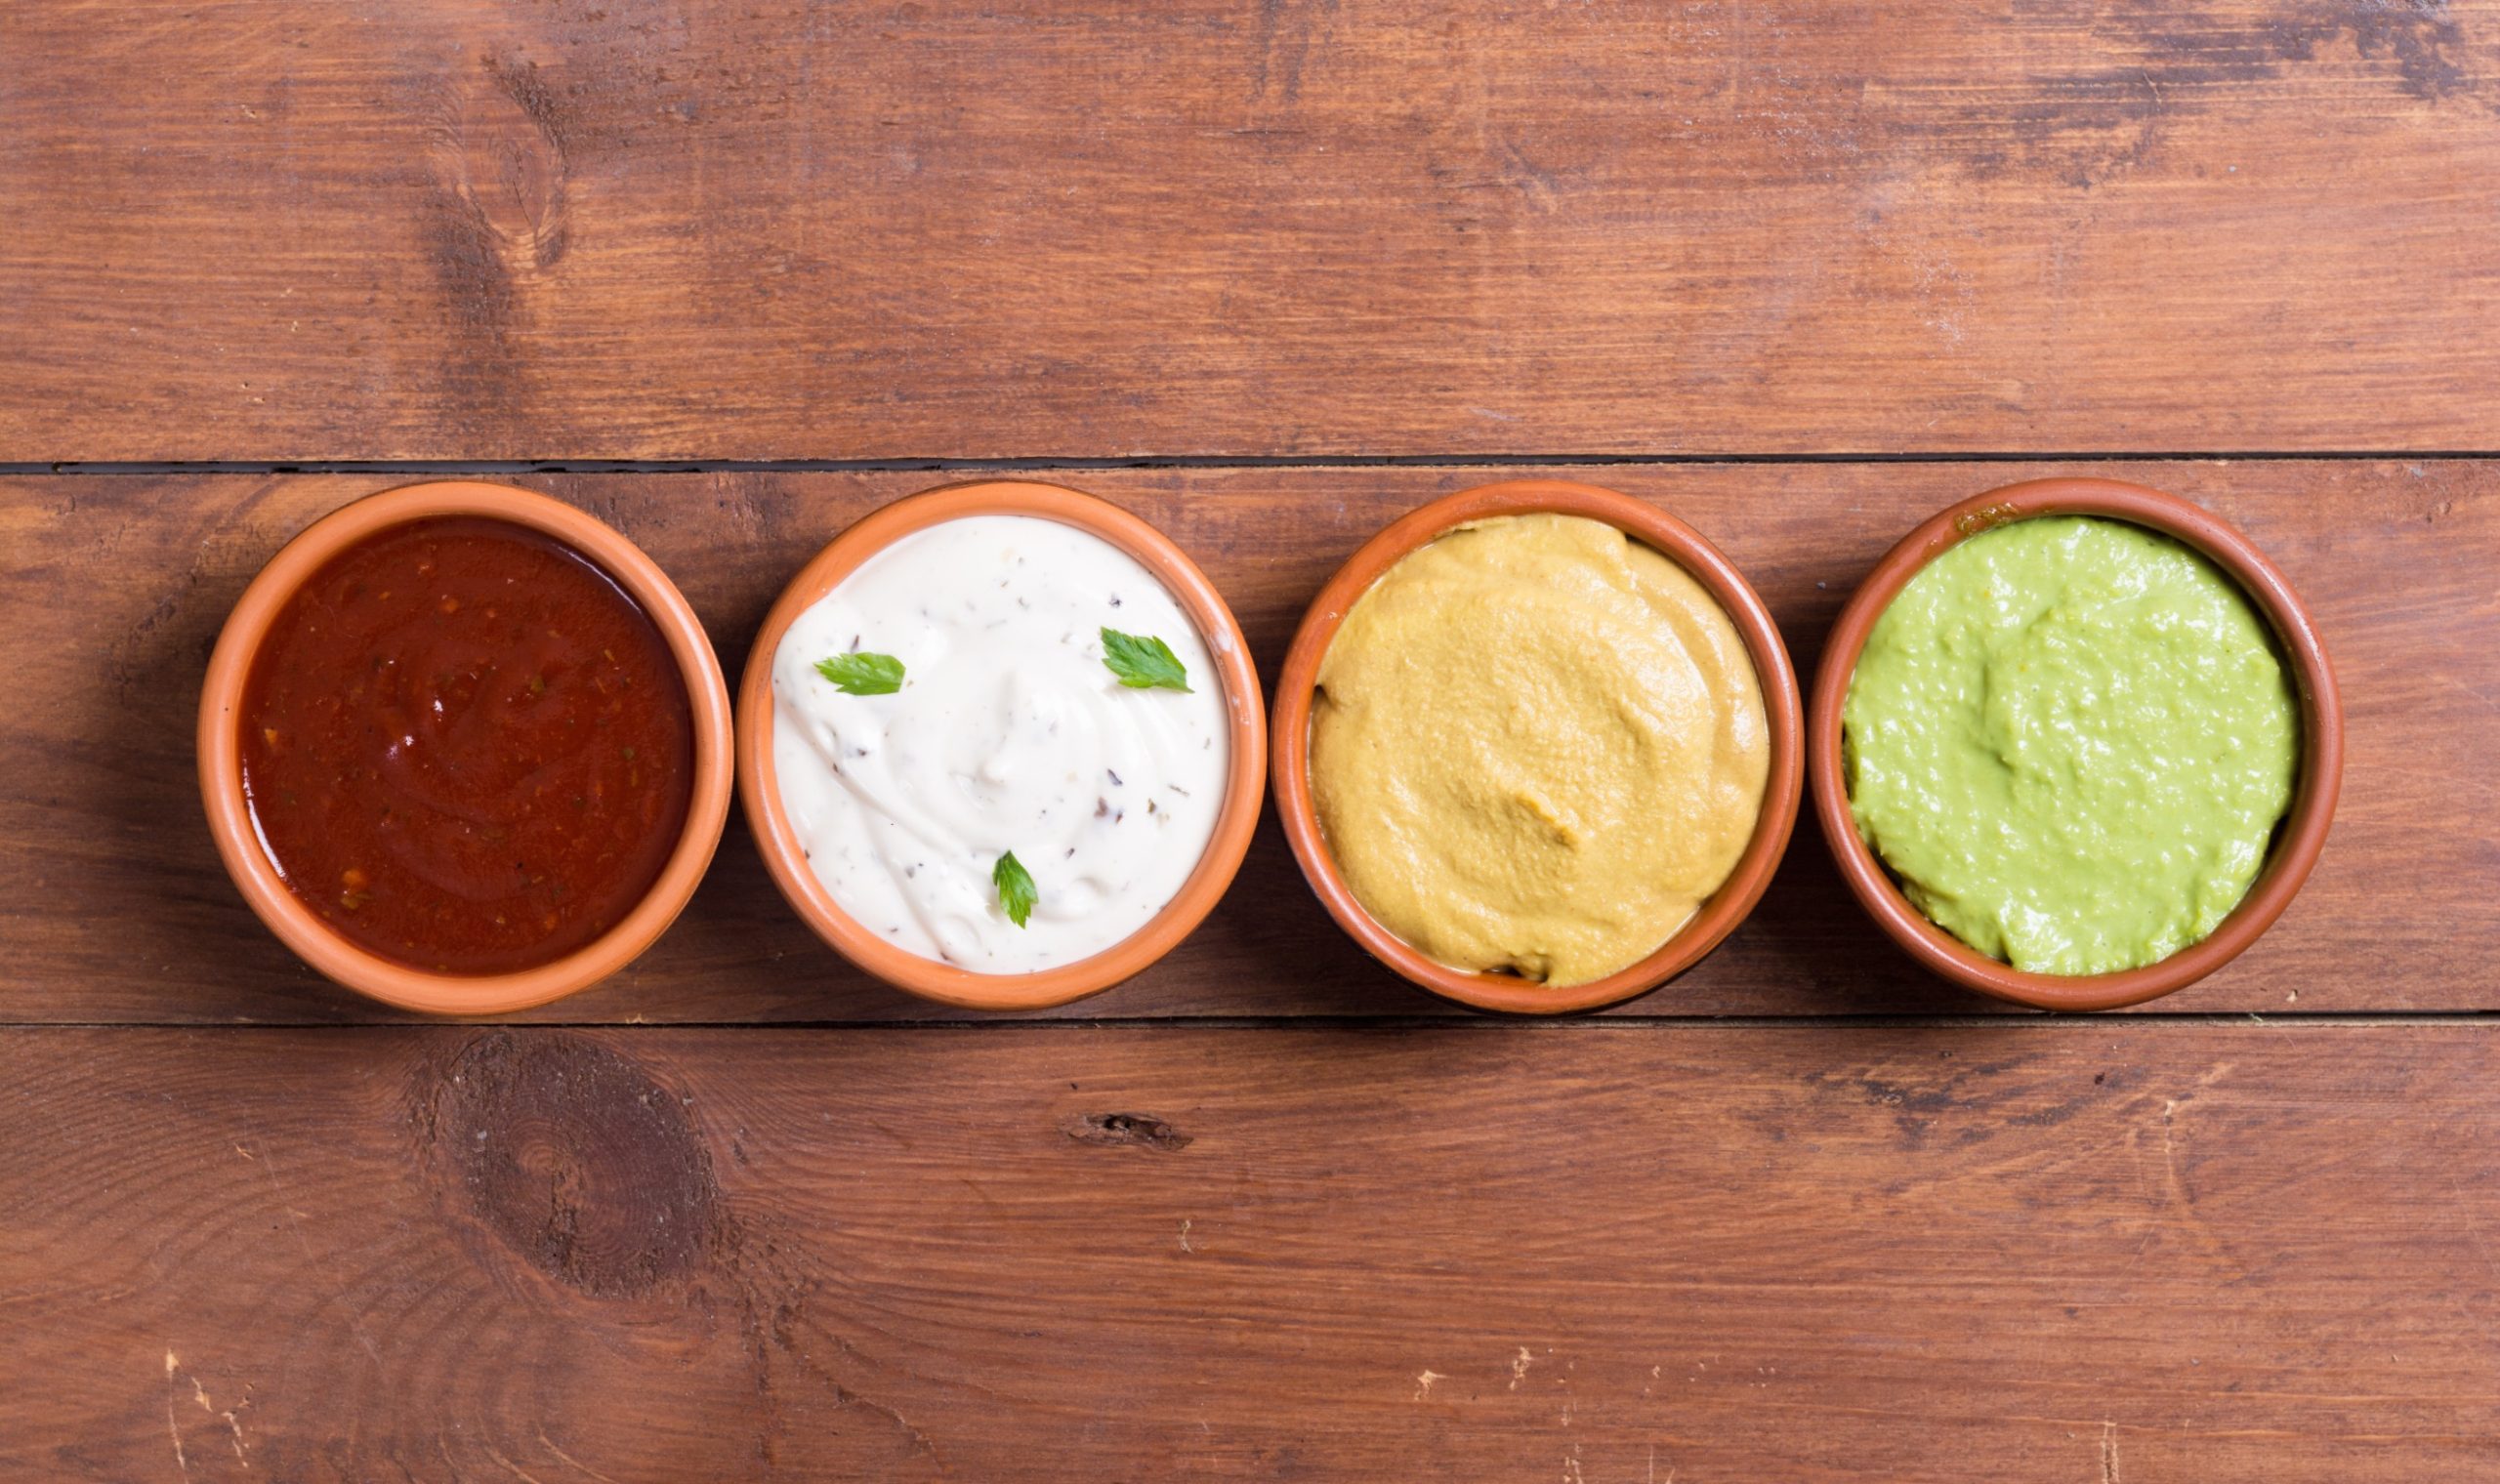 4 different sauces and dips from a sauce ingredient supplier in small bowls atop a wooden table.